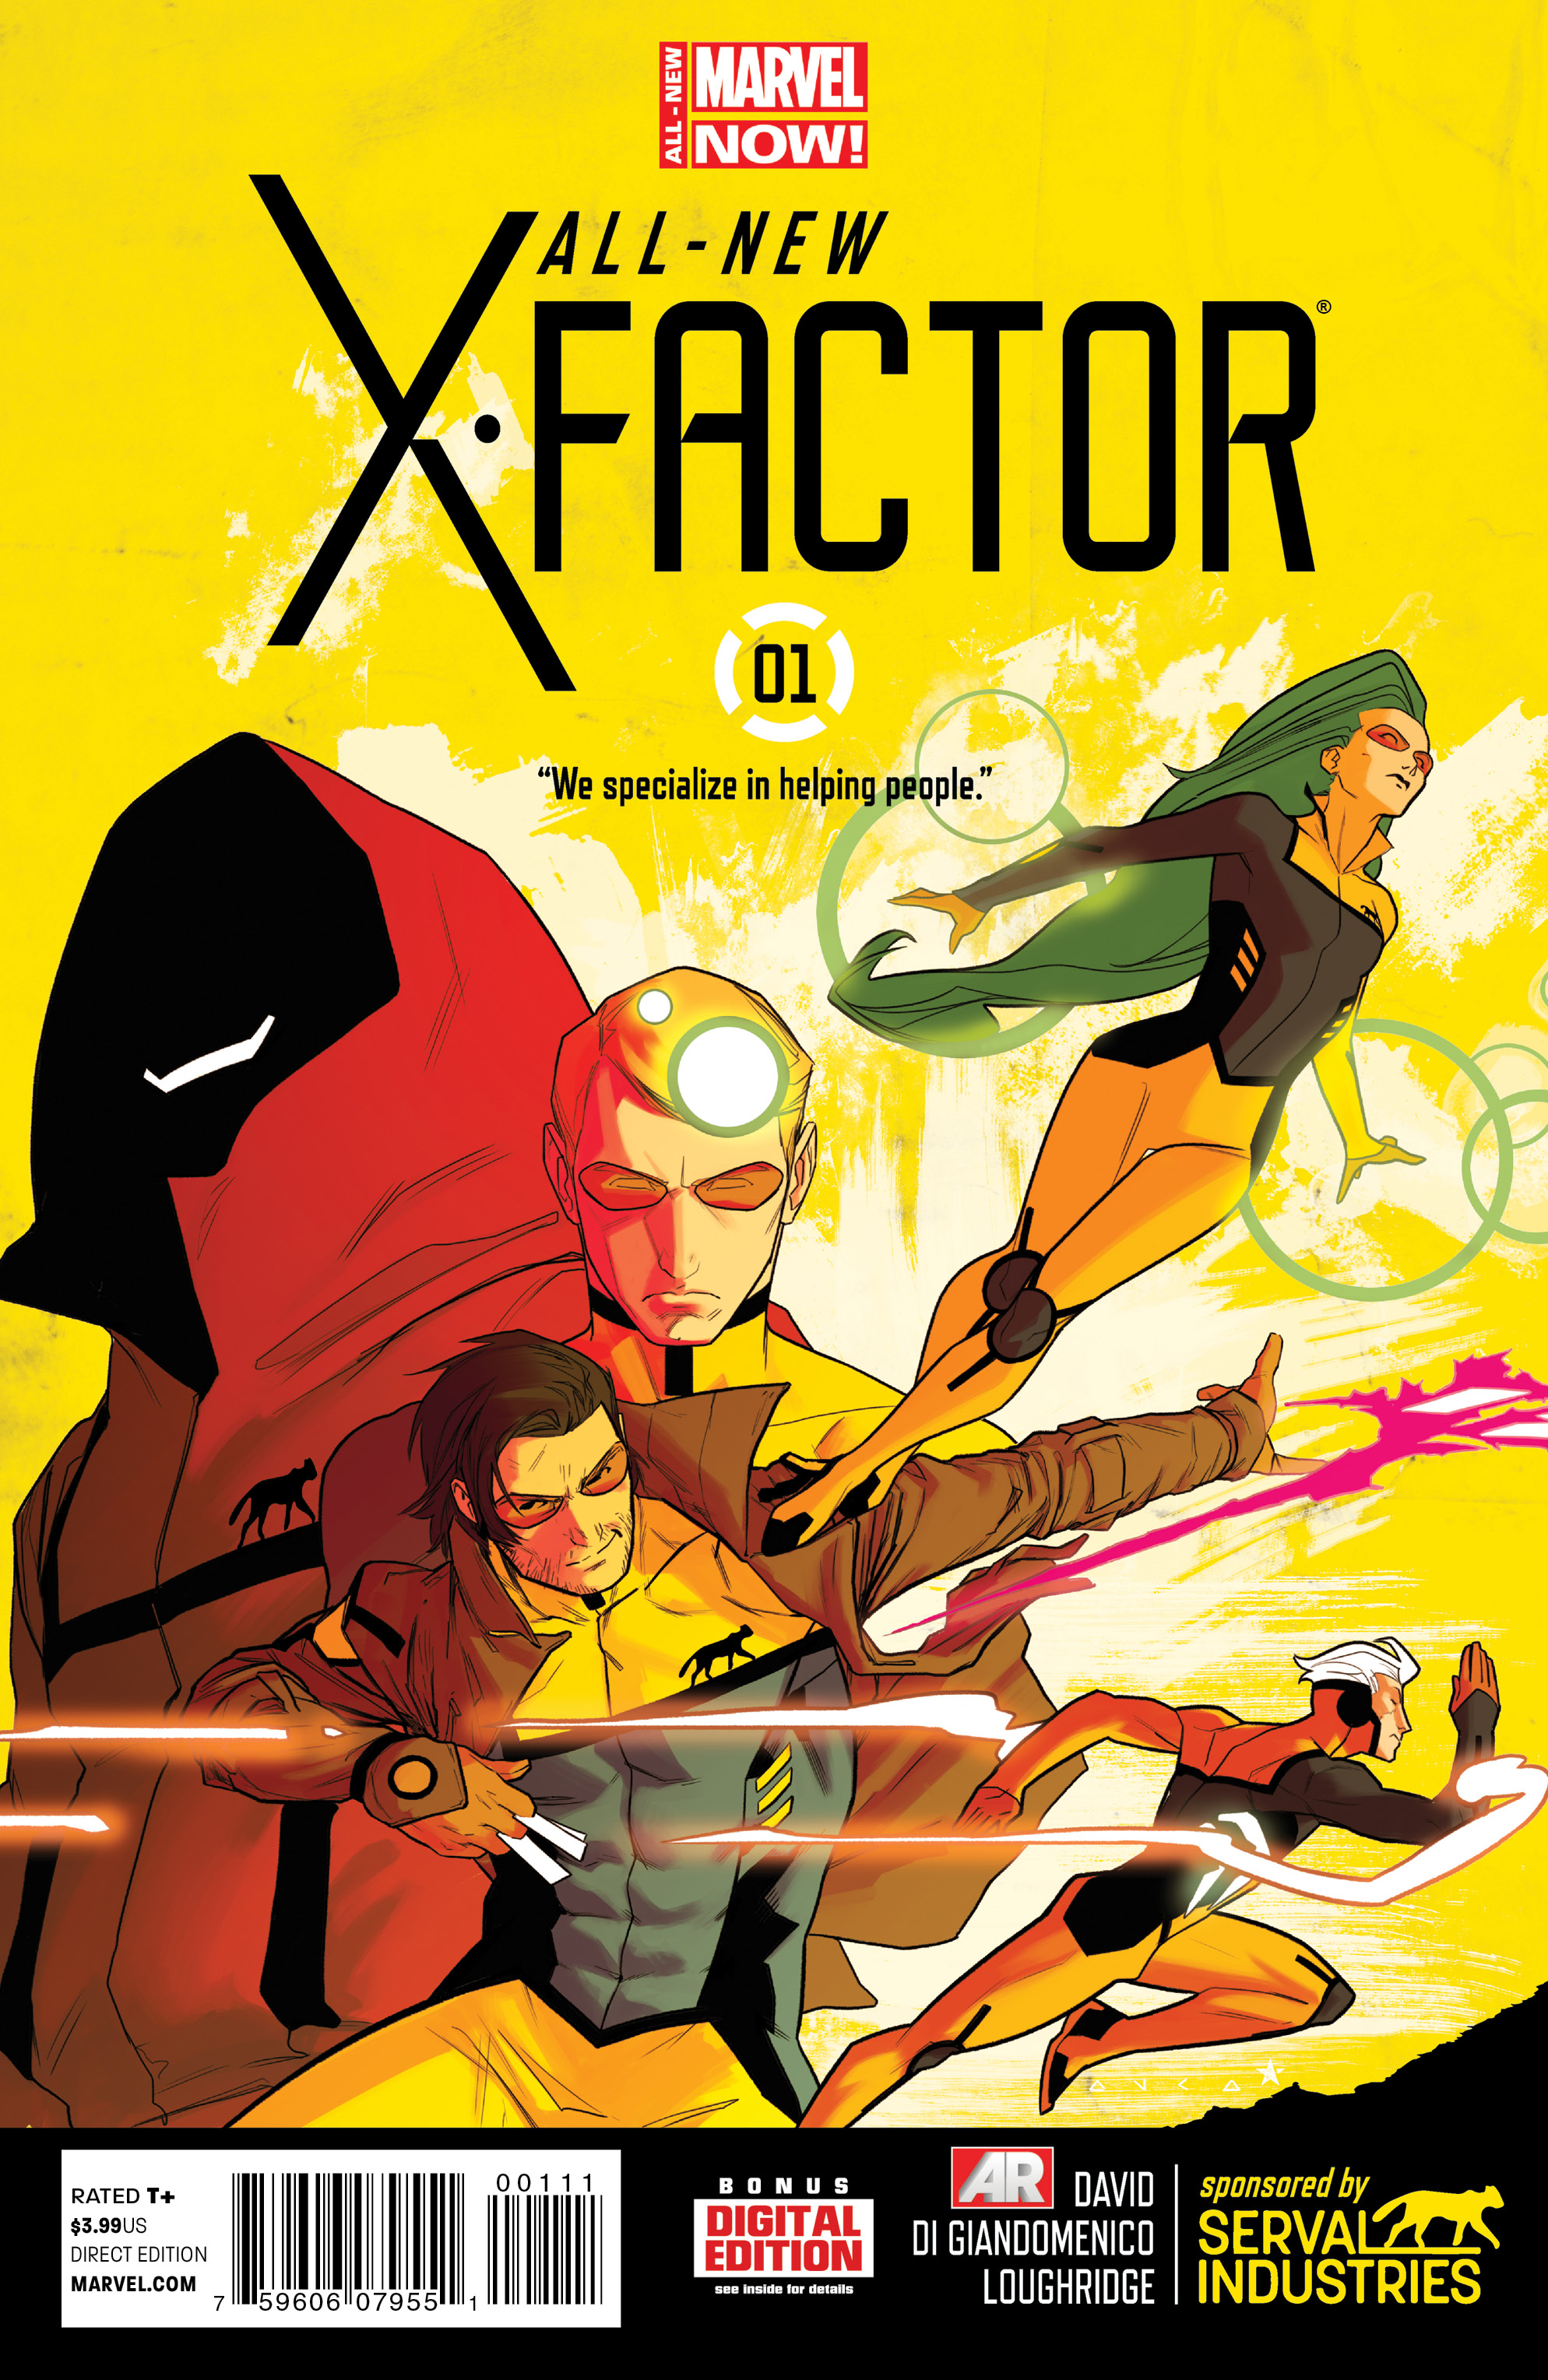 All-New X-Factor issue #1 review